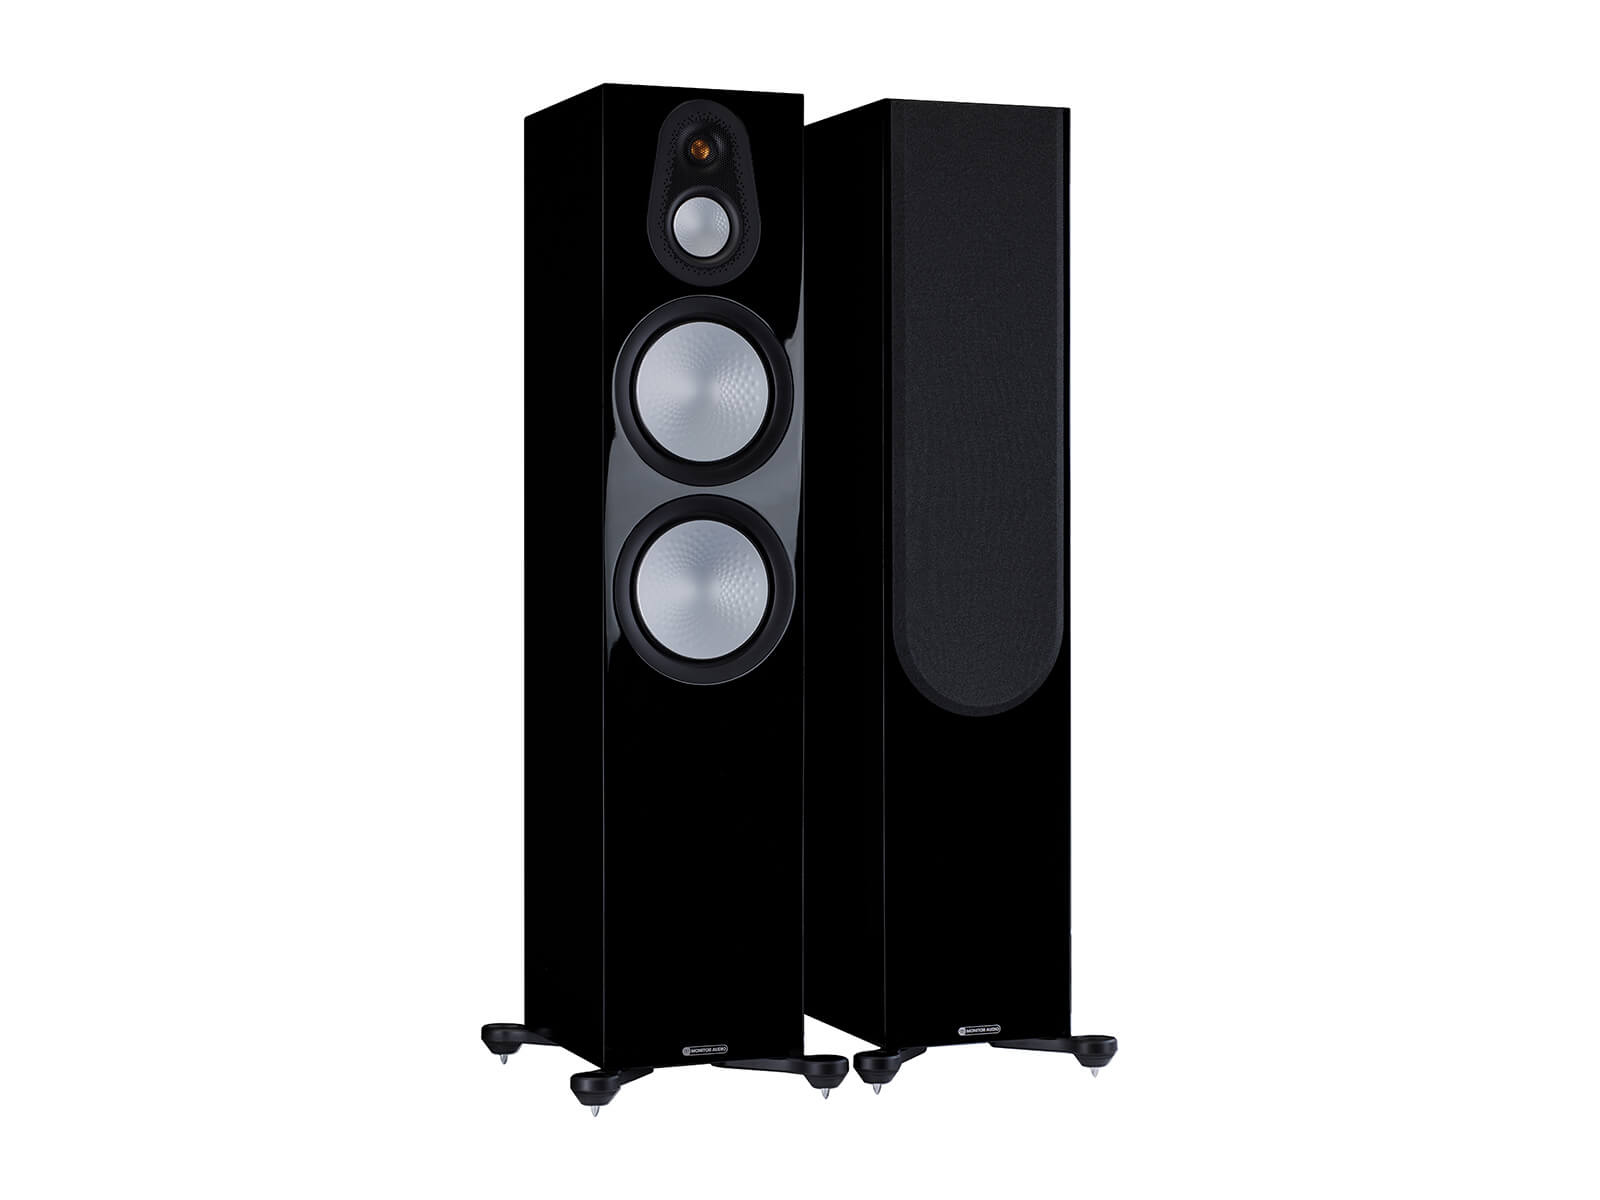 A pair of Monitor Audio's Silver 500 7G, in a high gloss black finish, iso view, with and without grilles.